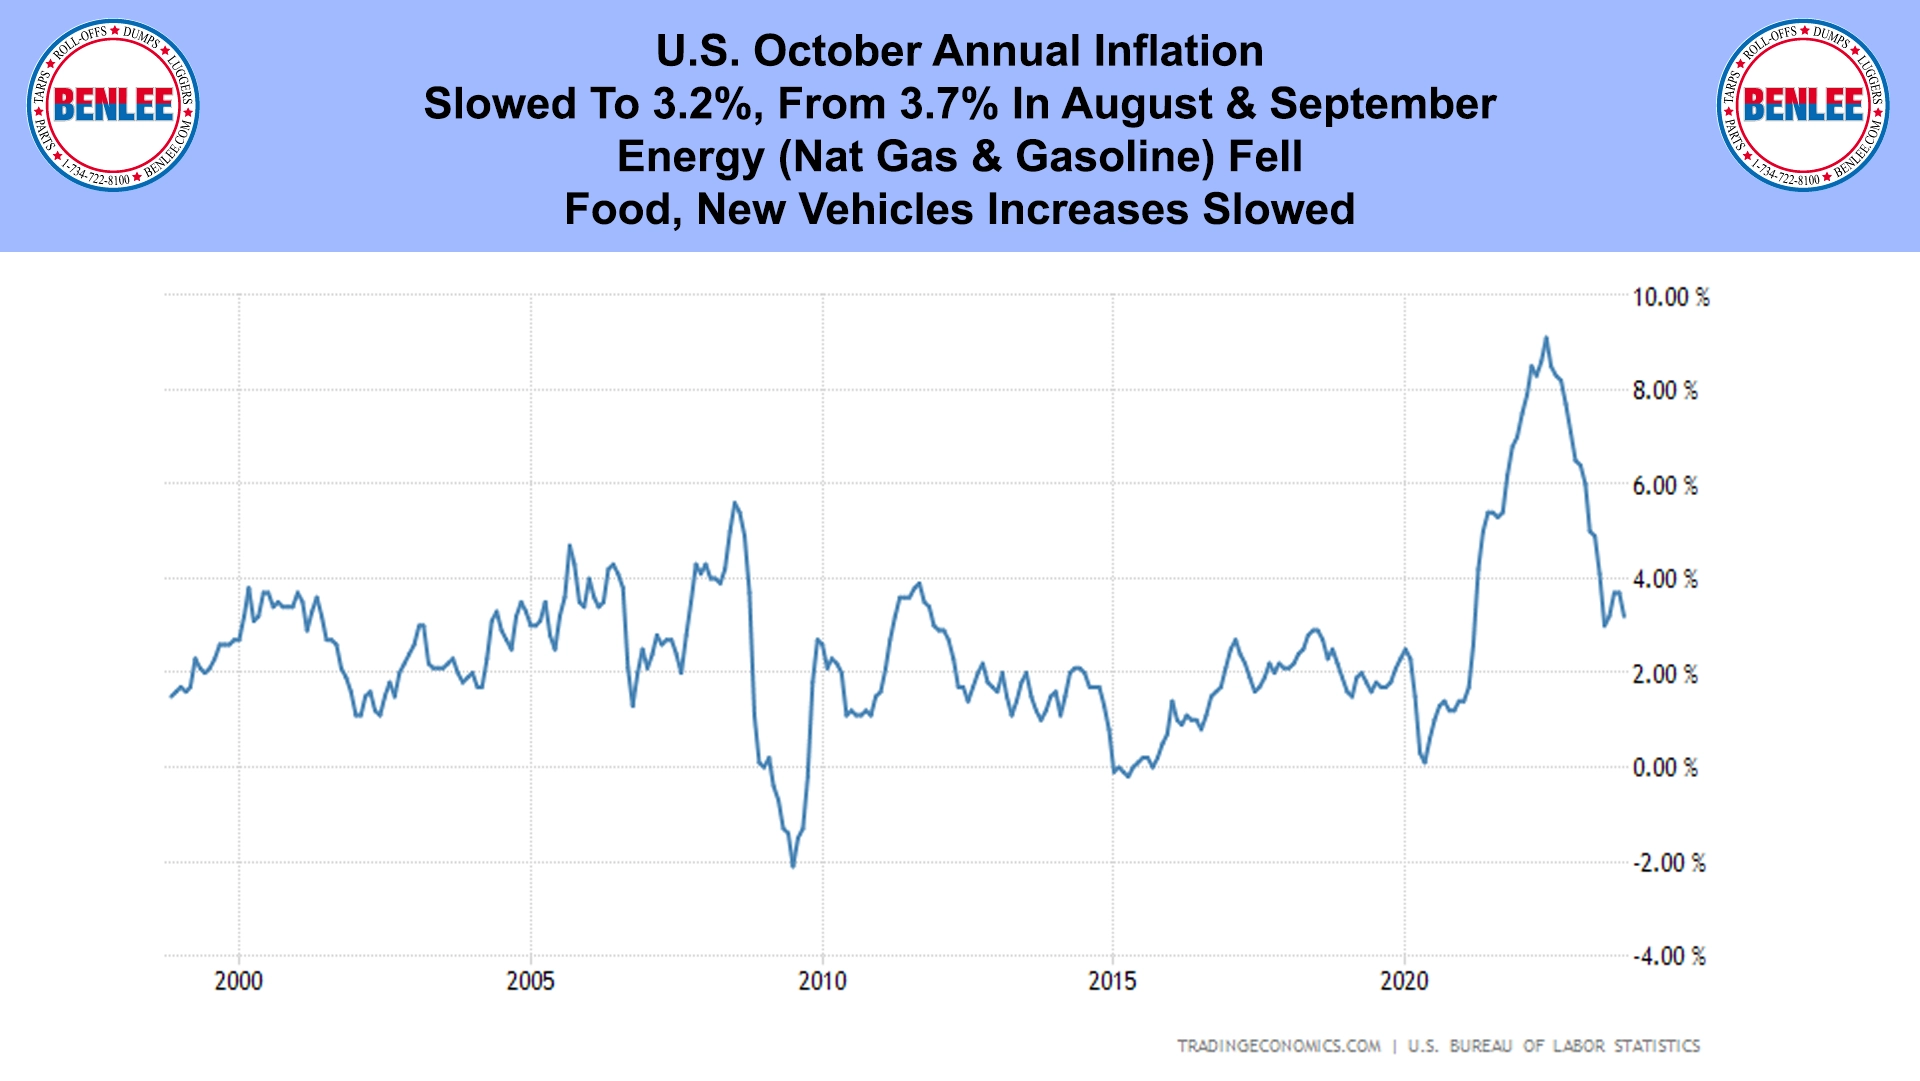 U.S. October Annual Inflation